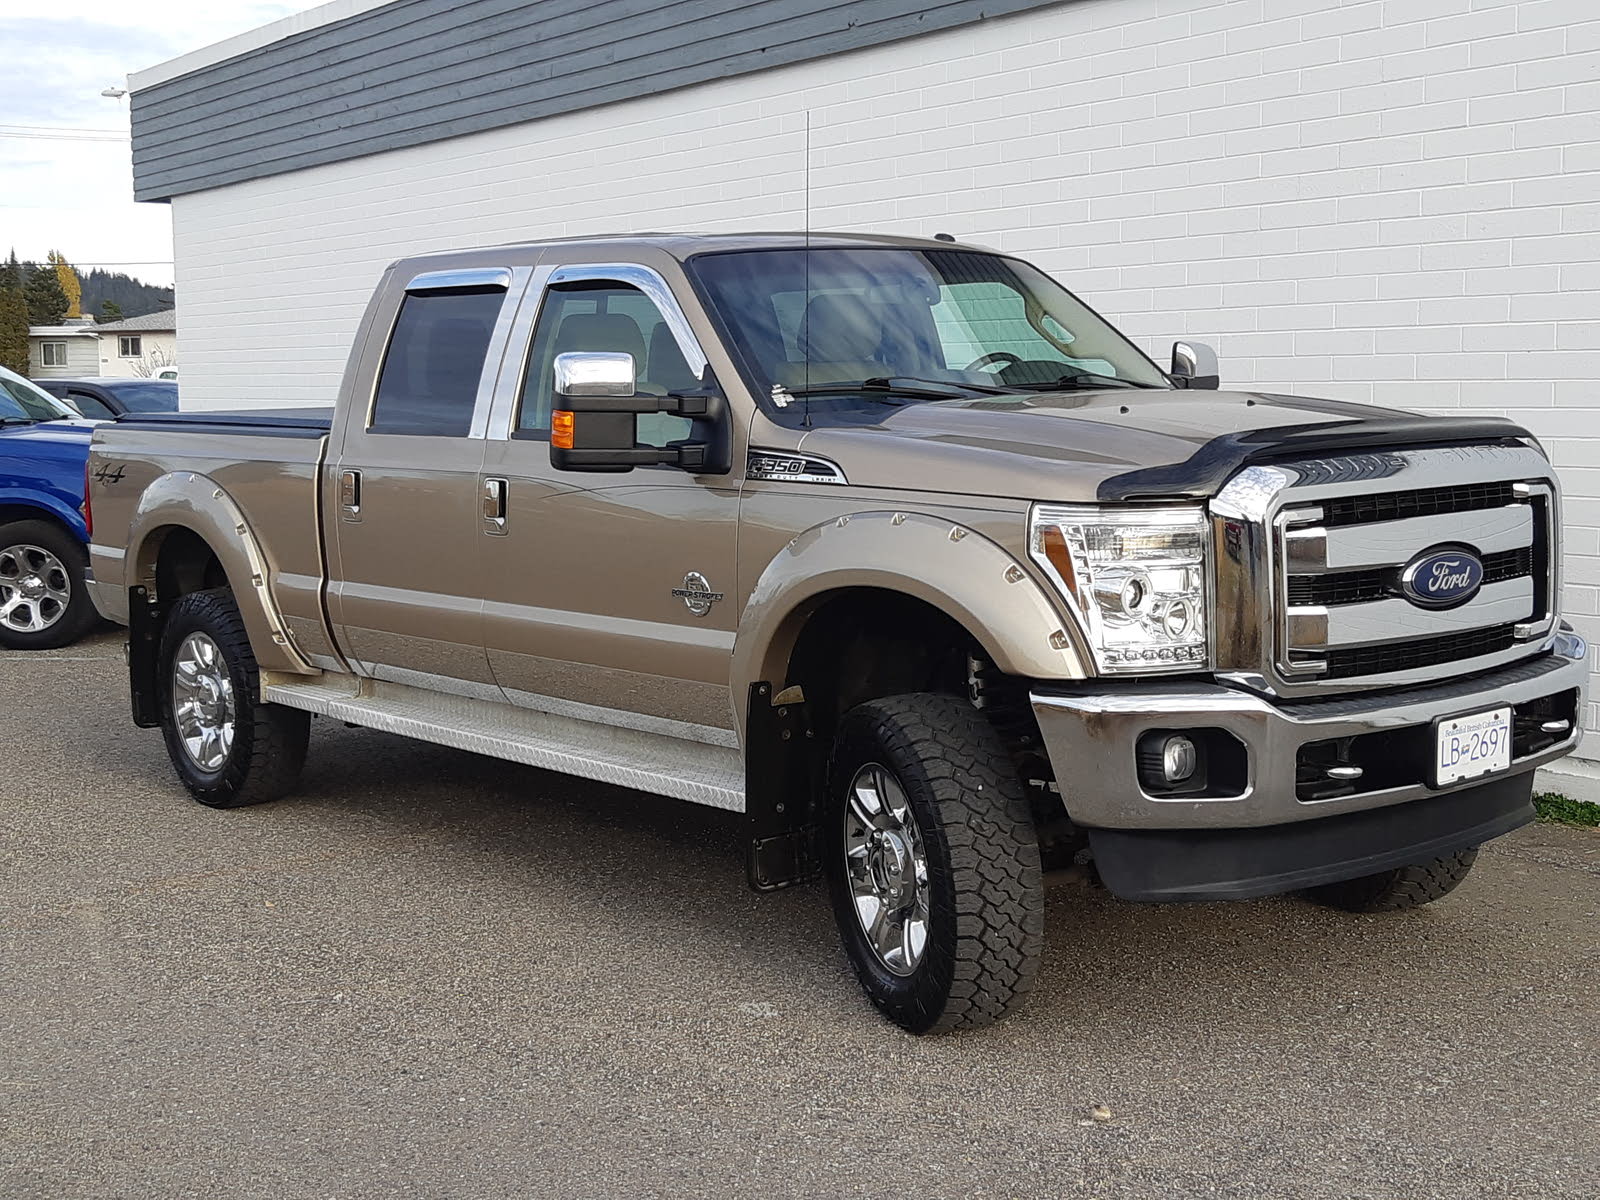 ford-f-350-super-duty-questions-my-truck-is-in-bc-canada-can-i-list